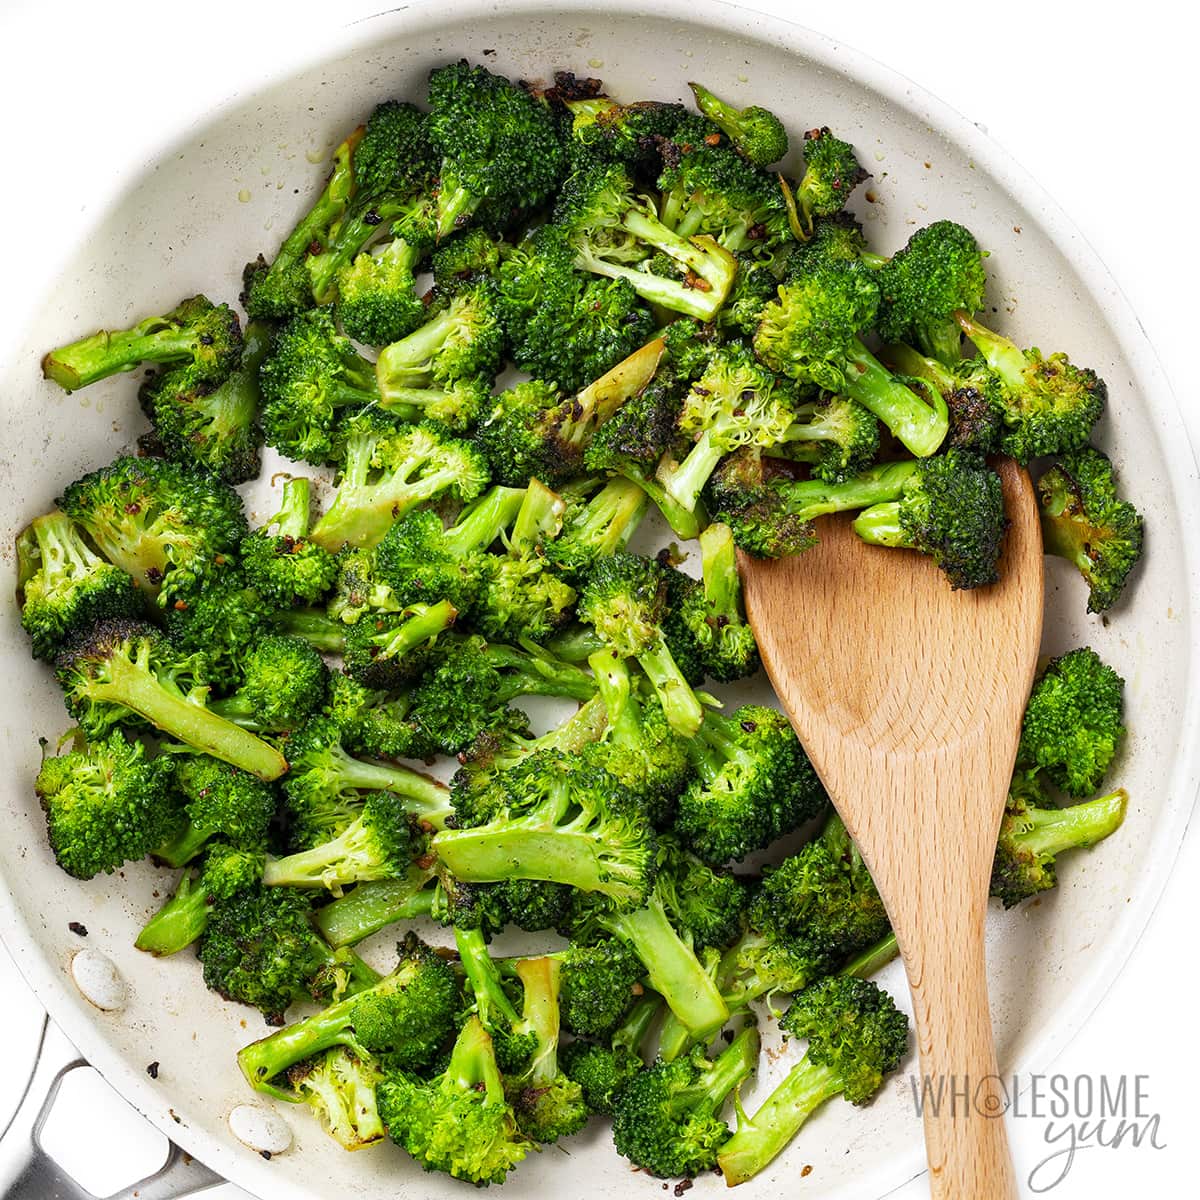 Use a wooden spoon to sauté broccoli in skillet.